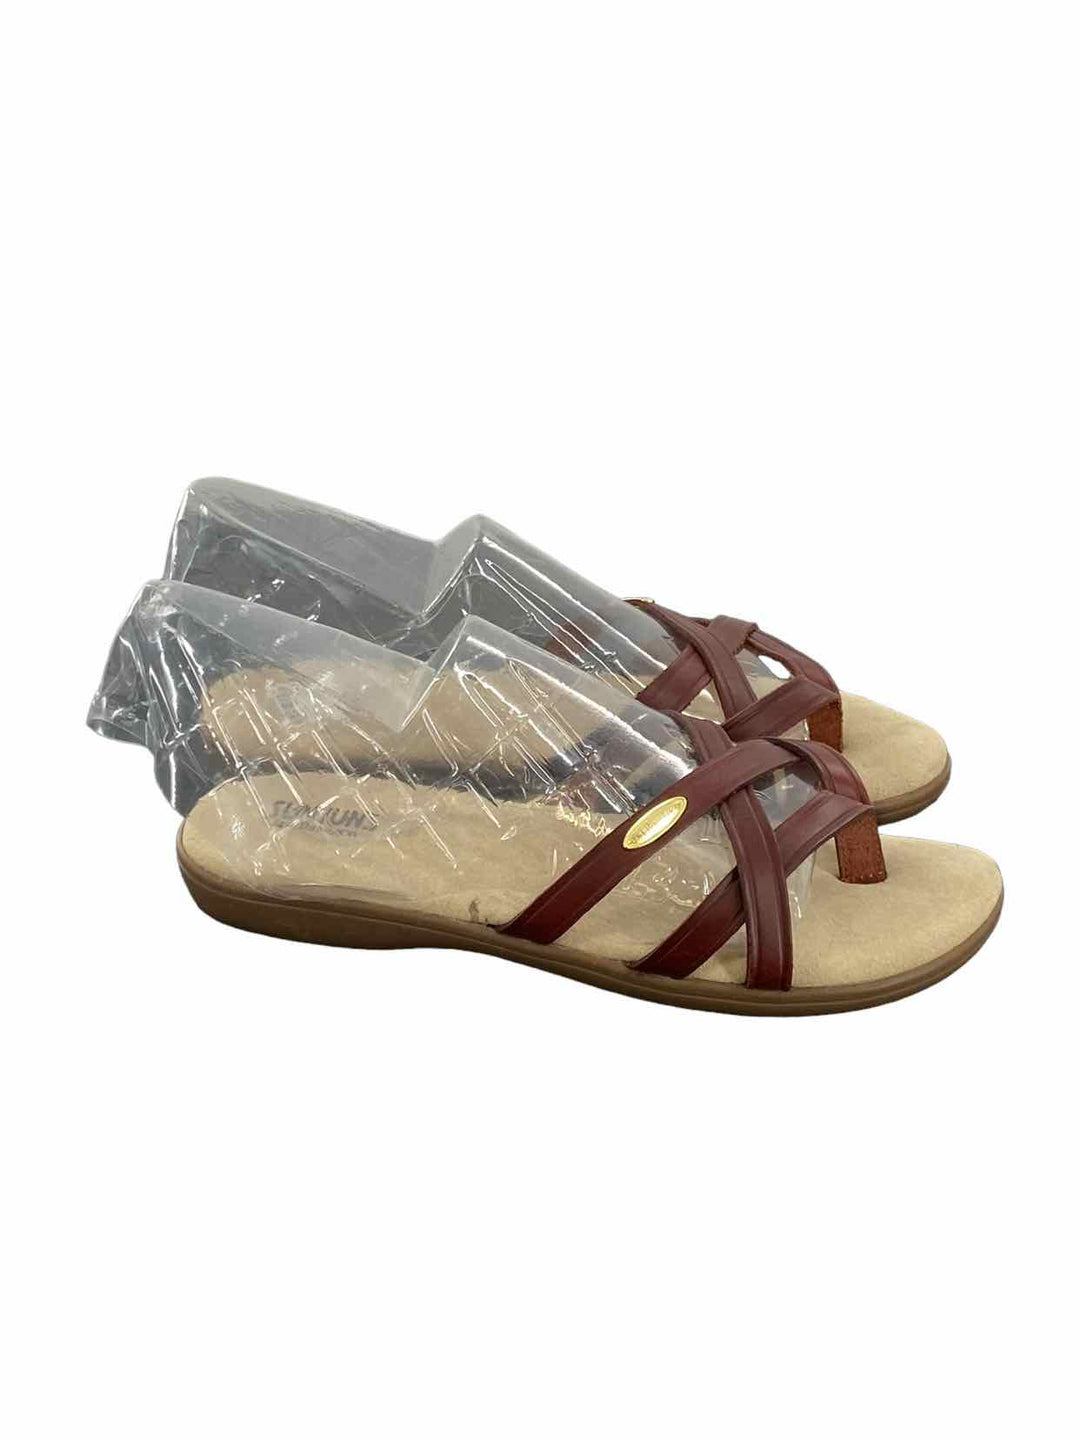 Sunjuns From GH Bas & Co. Shoe Size 9 Brown Leather Sandals